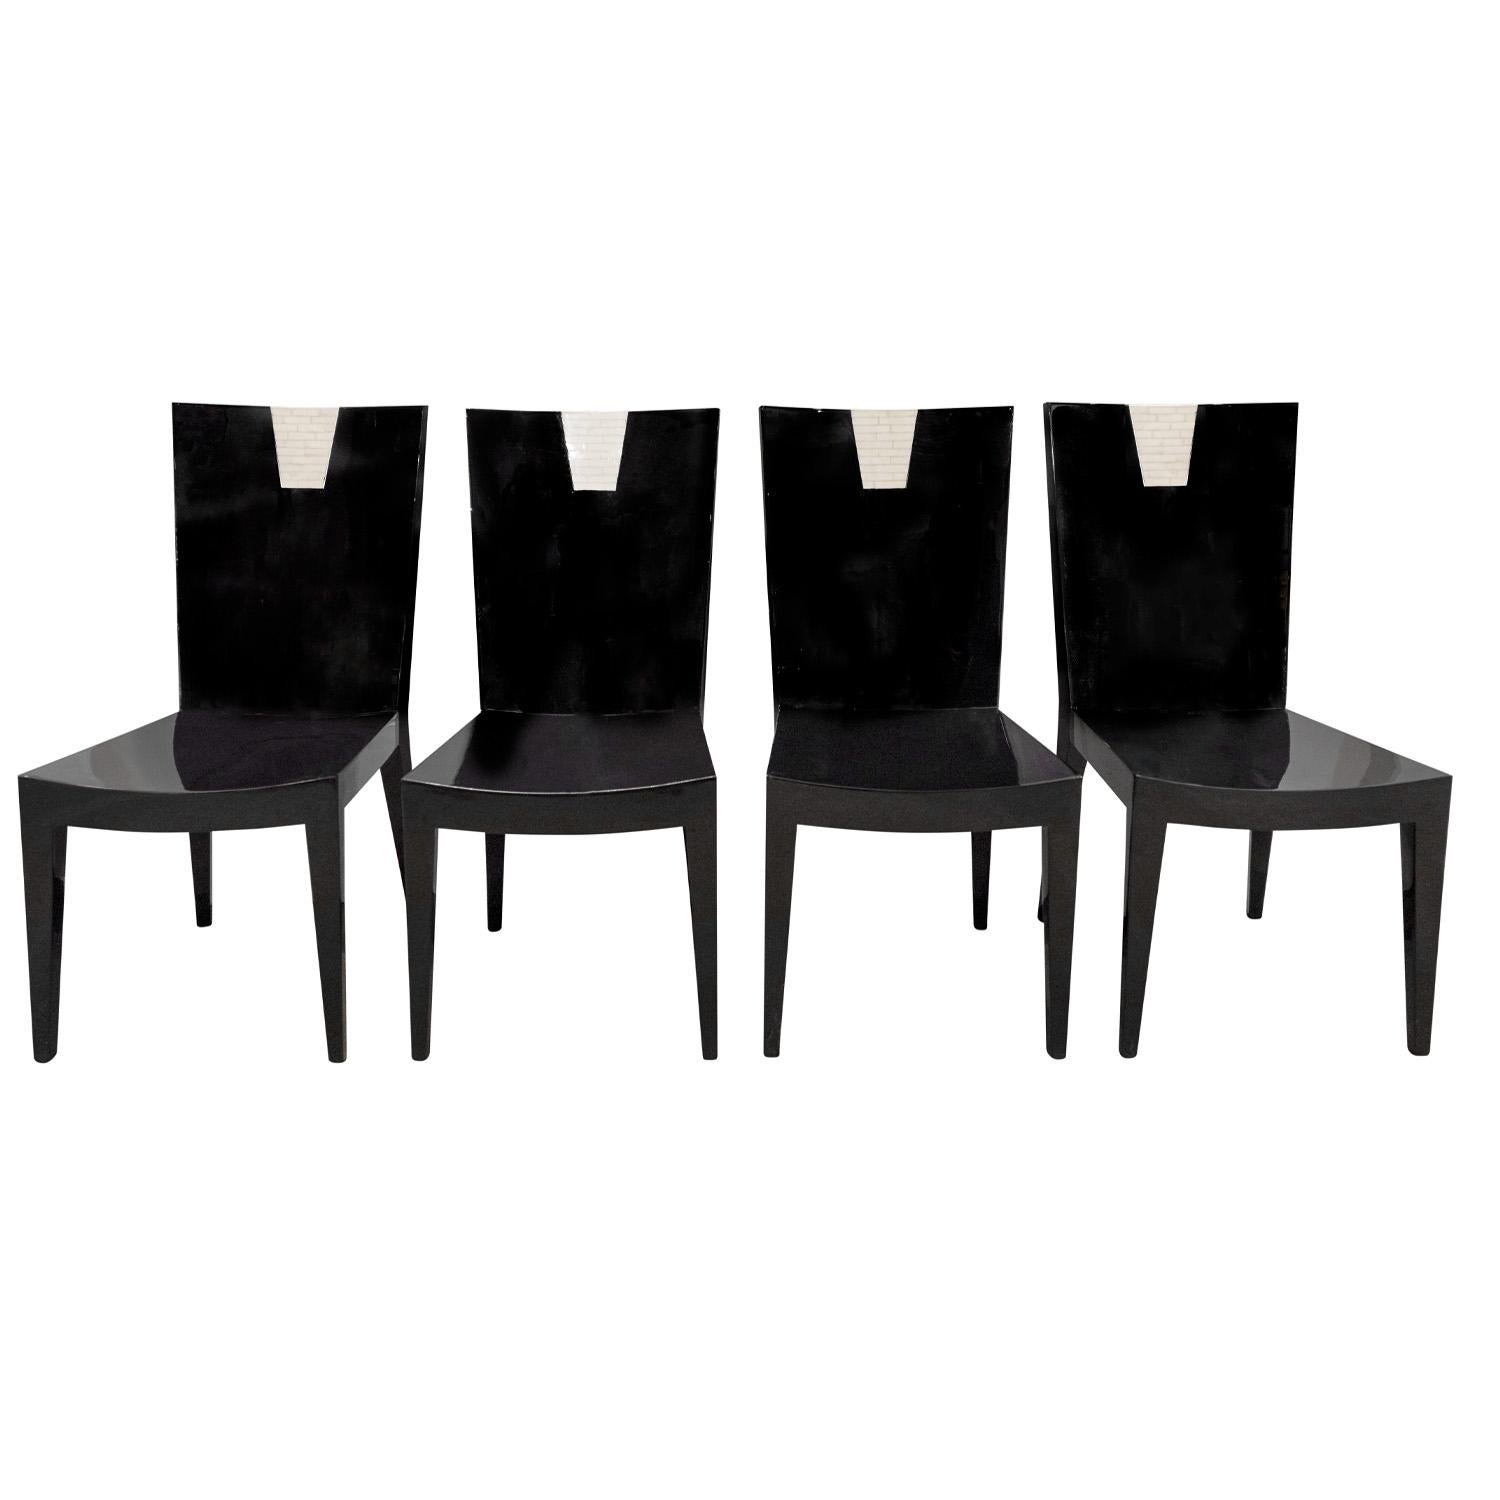 Modern Set of 4 Chic Game/Dining Chairs in Black Lacquer with Bone Inlays 1980s